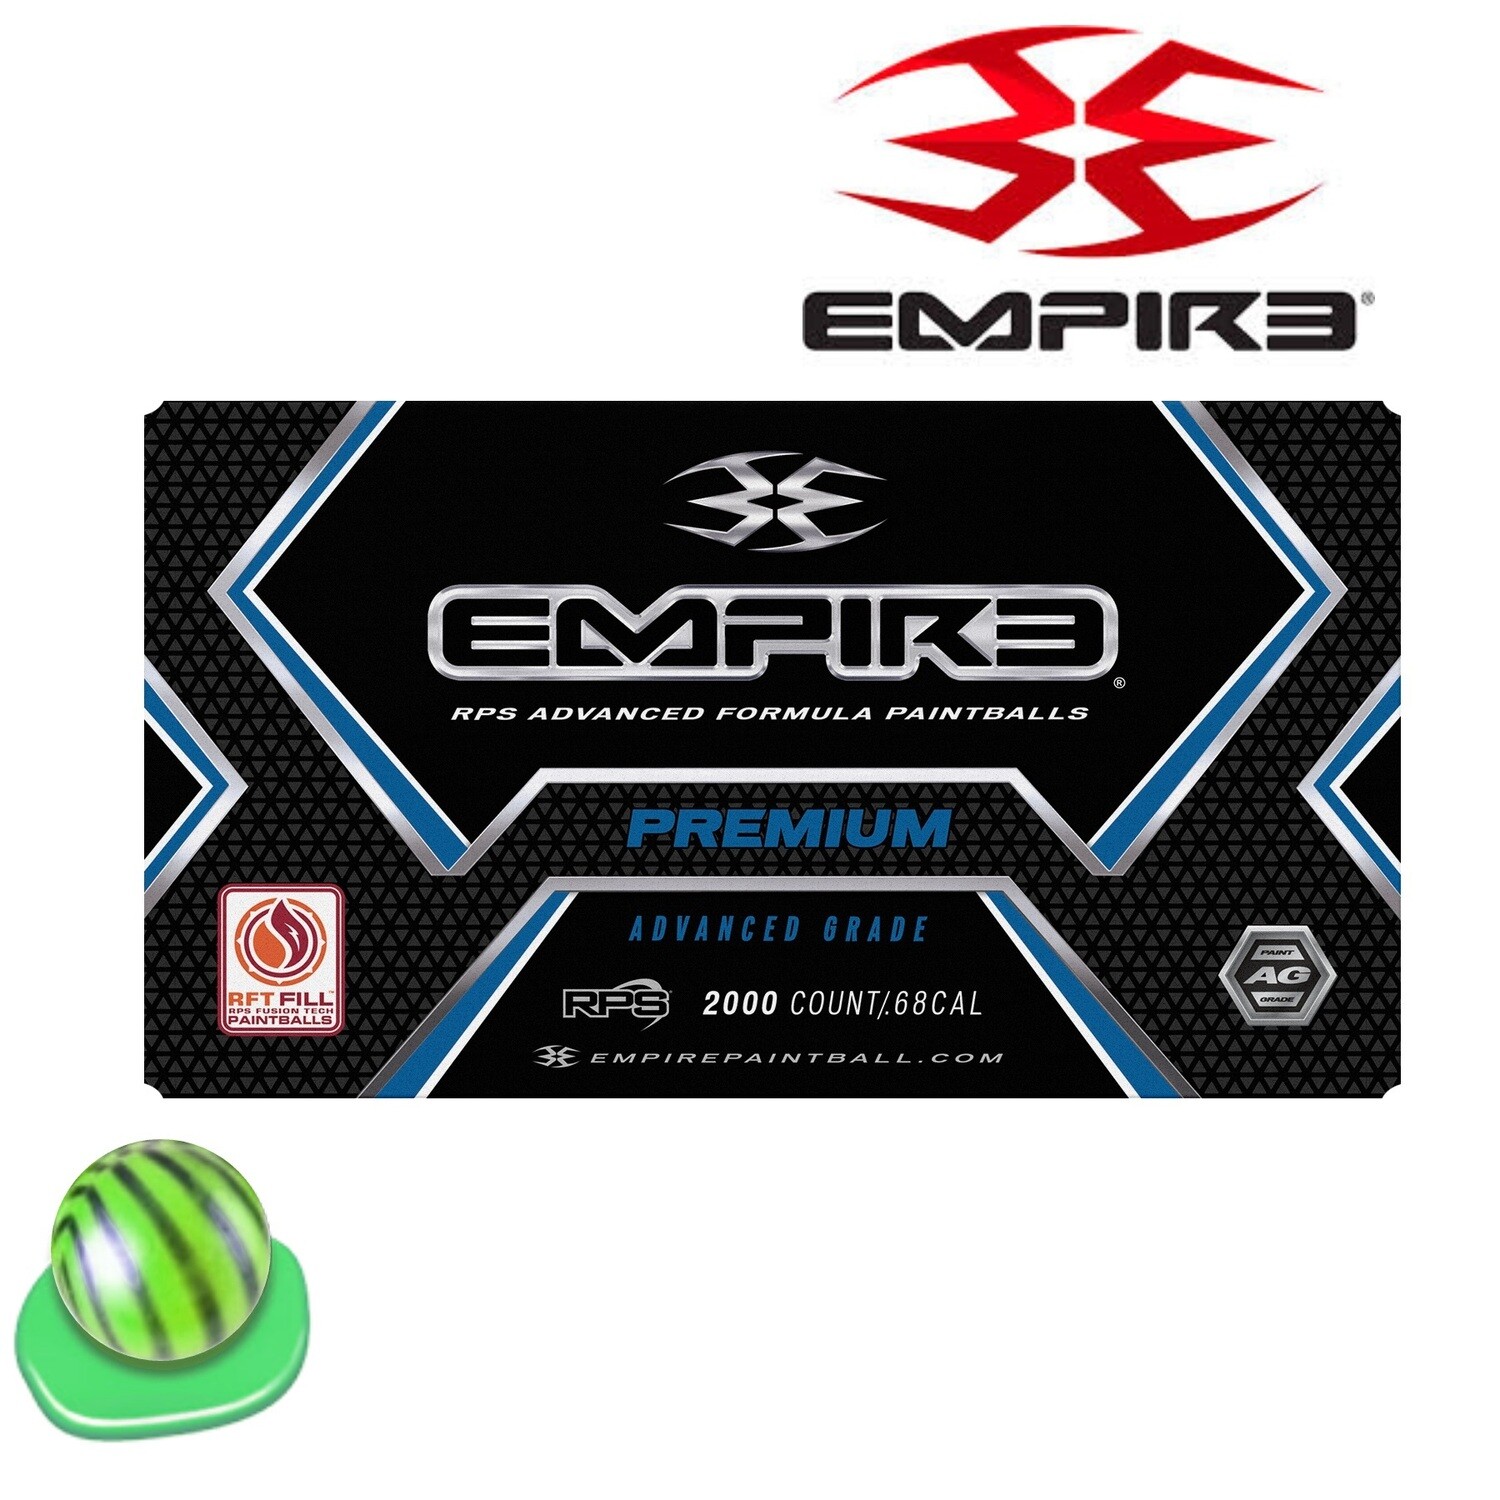 Empire Premium .68 cal Paintballs - Case of 2000 Rds - Lime/Stripe Shell - Neon Green